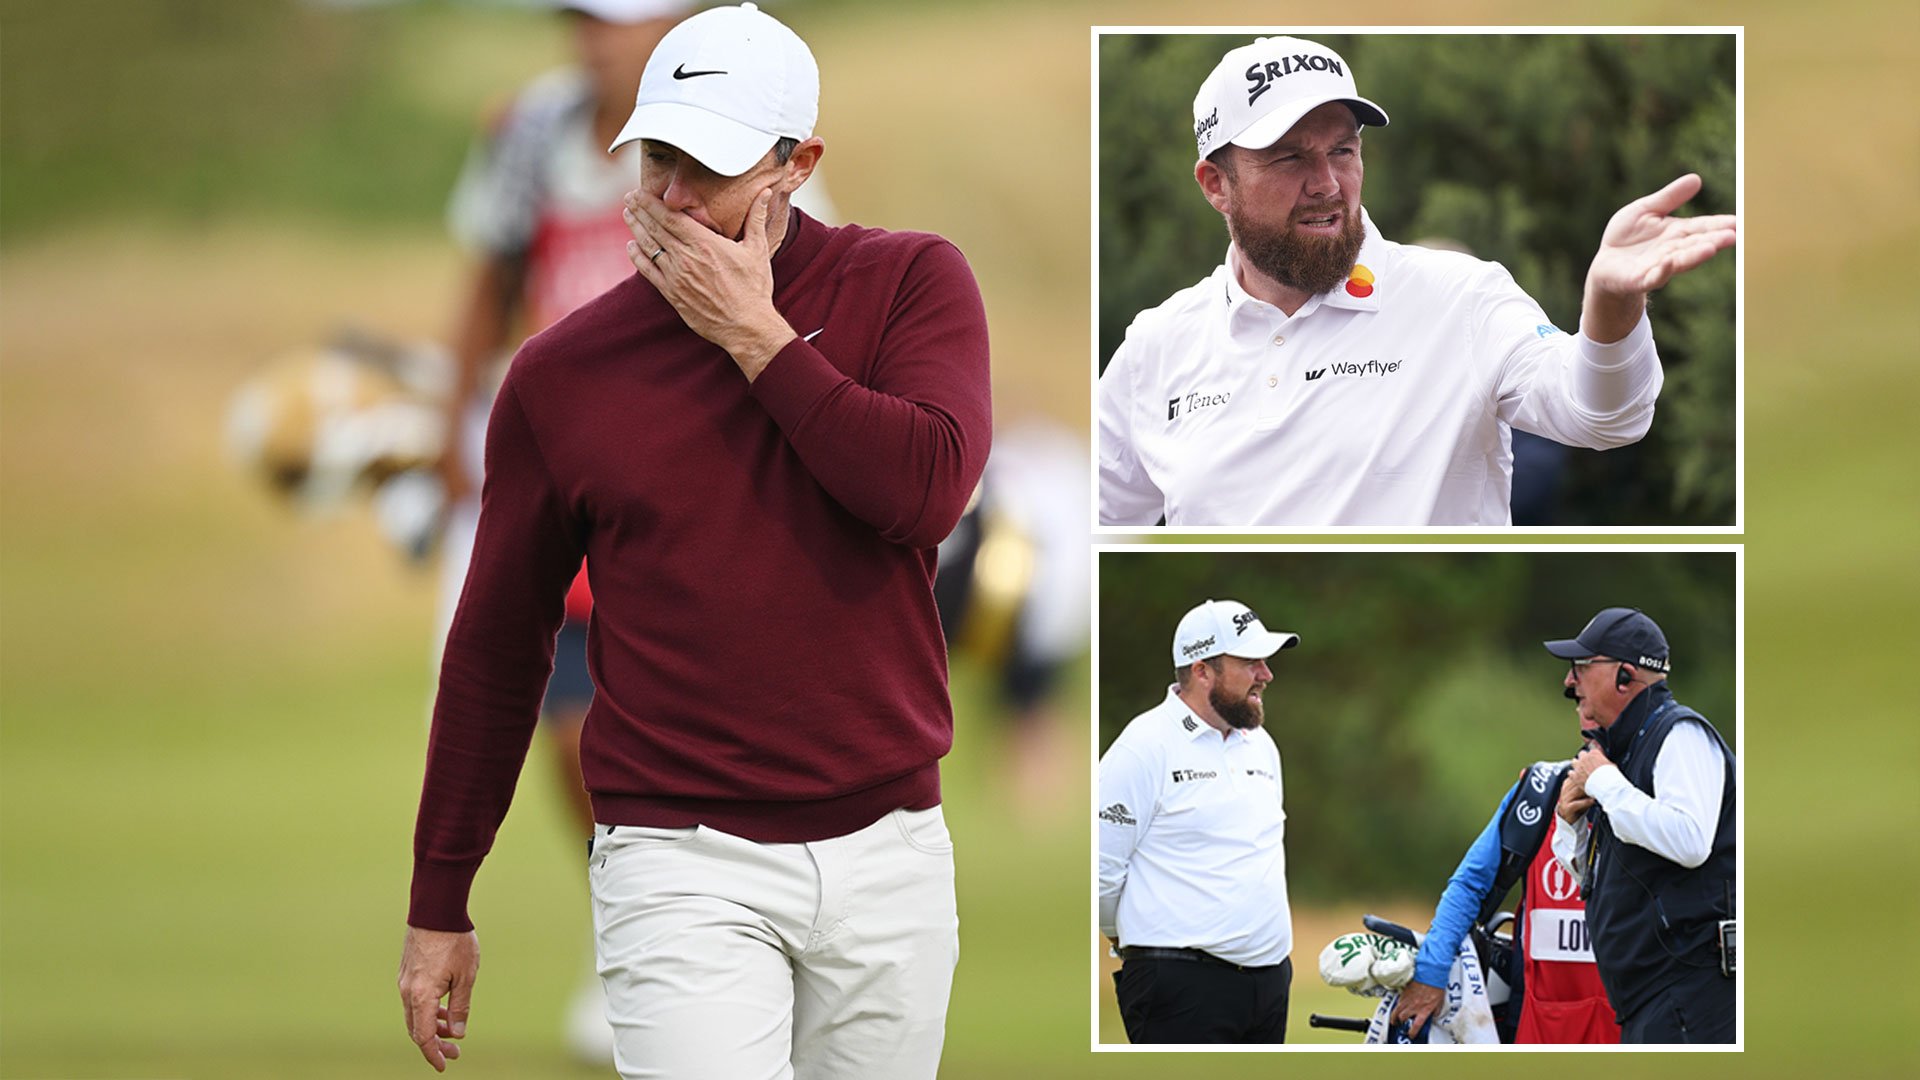 Rory McIlroy MISSES cut in woeful display at The Open as Lowry leads despite outrageous X-rated outburst at TV cameraman